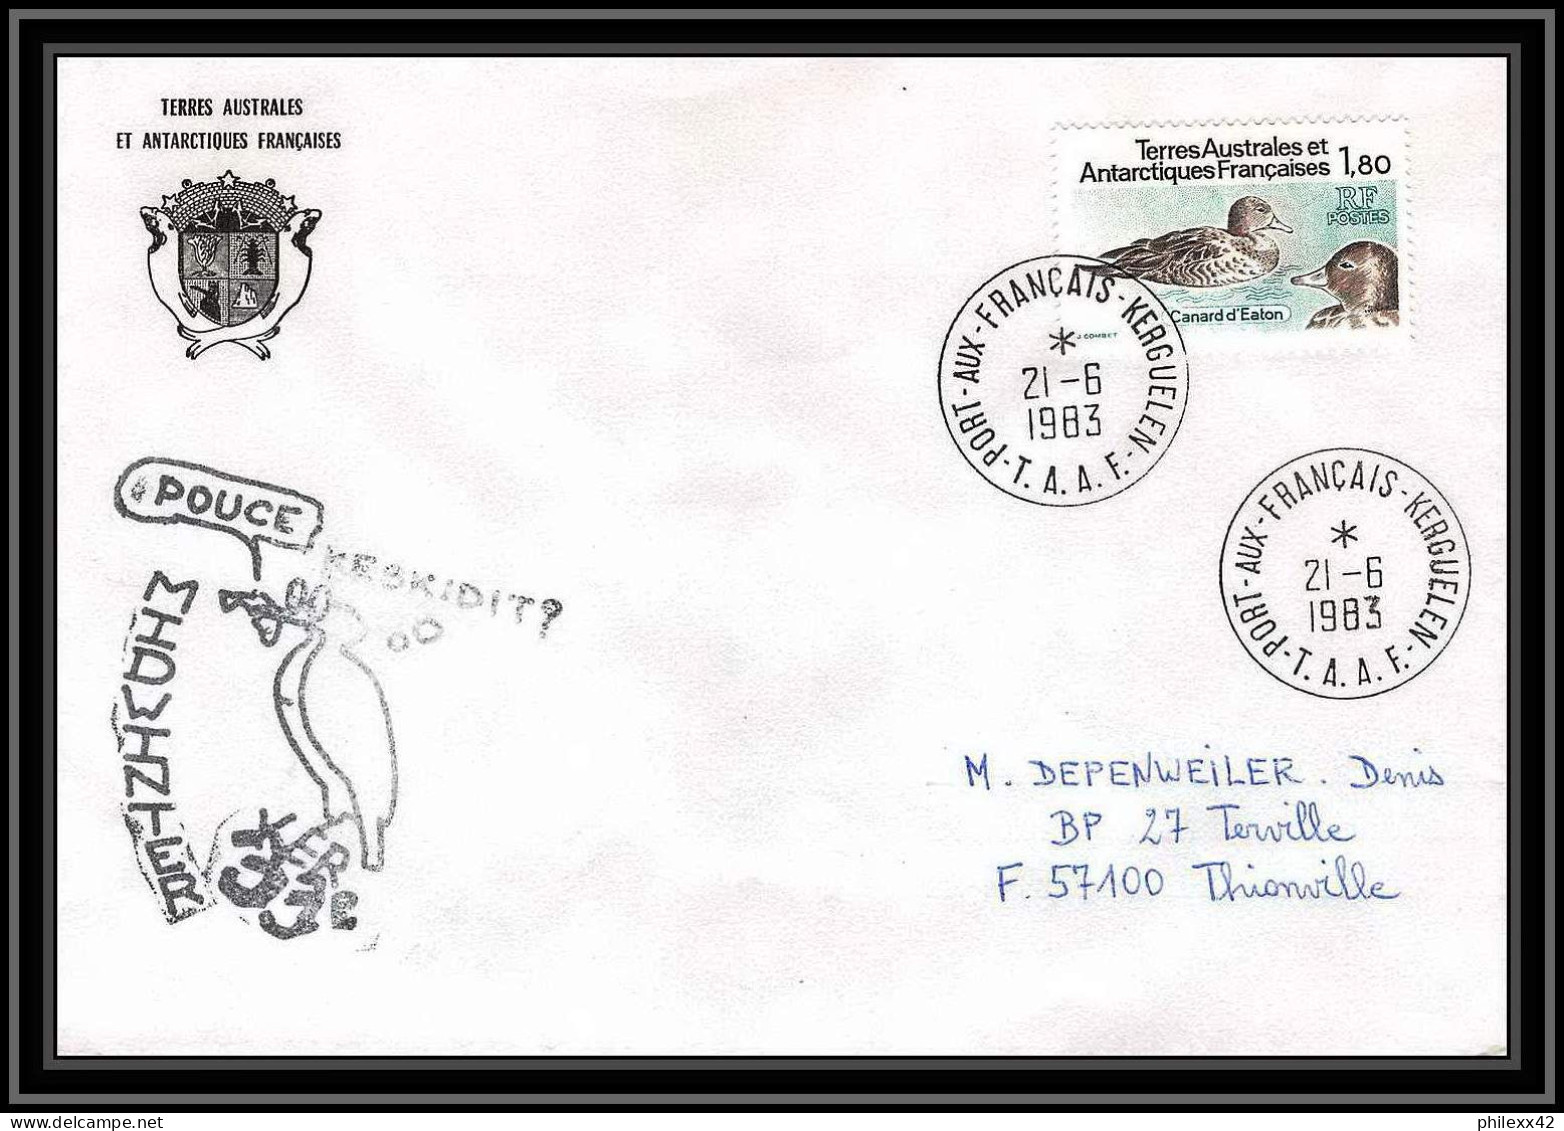 0703 Taaf Terres Australes Antarctic Lettre (cover) 21/06/1983 N° 98 CANARDS - Covers & Documents